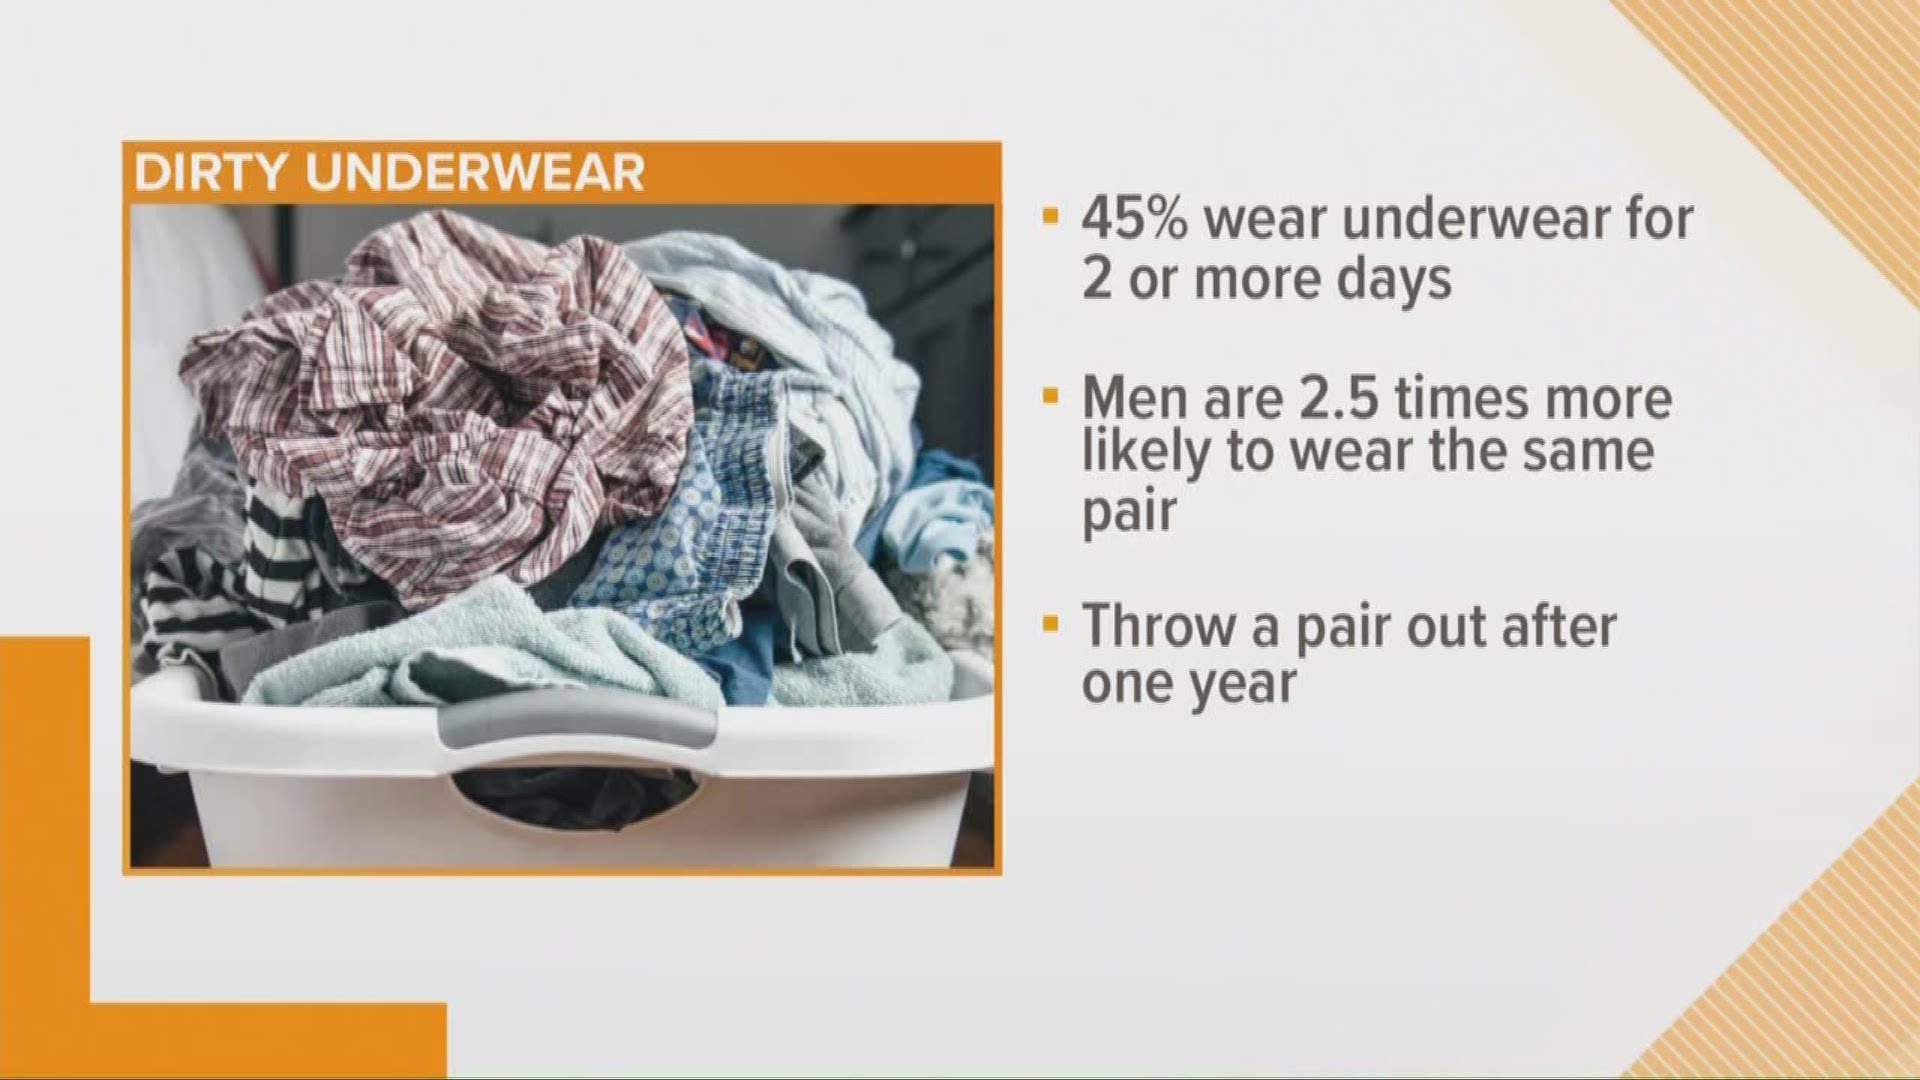 How often do Americans change their underwear? Not enough, according to a study.